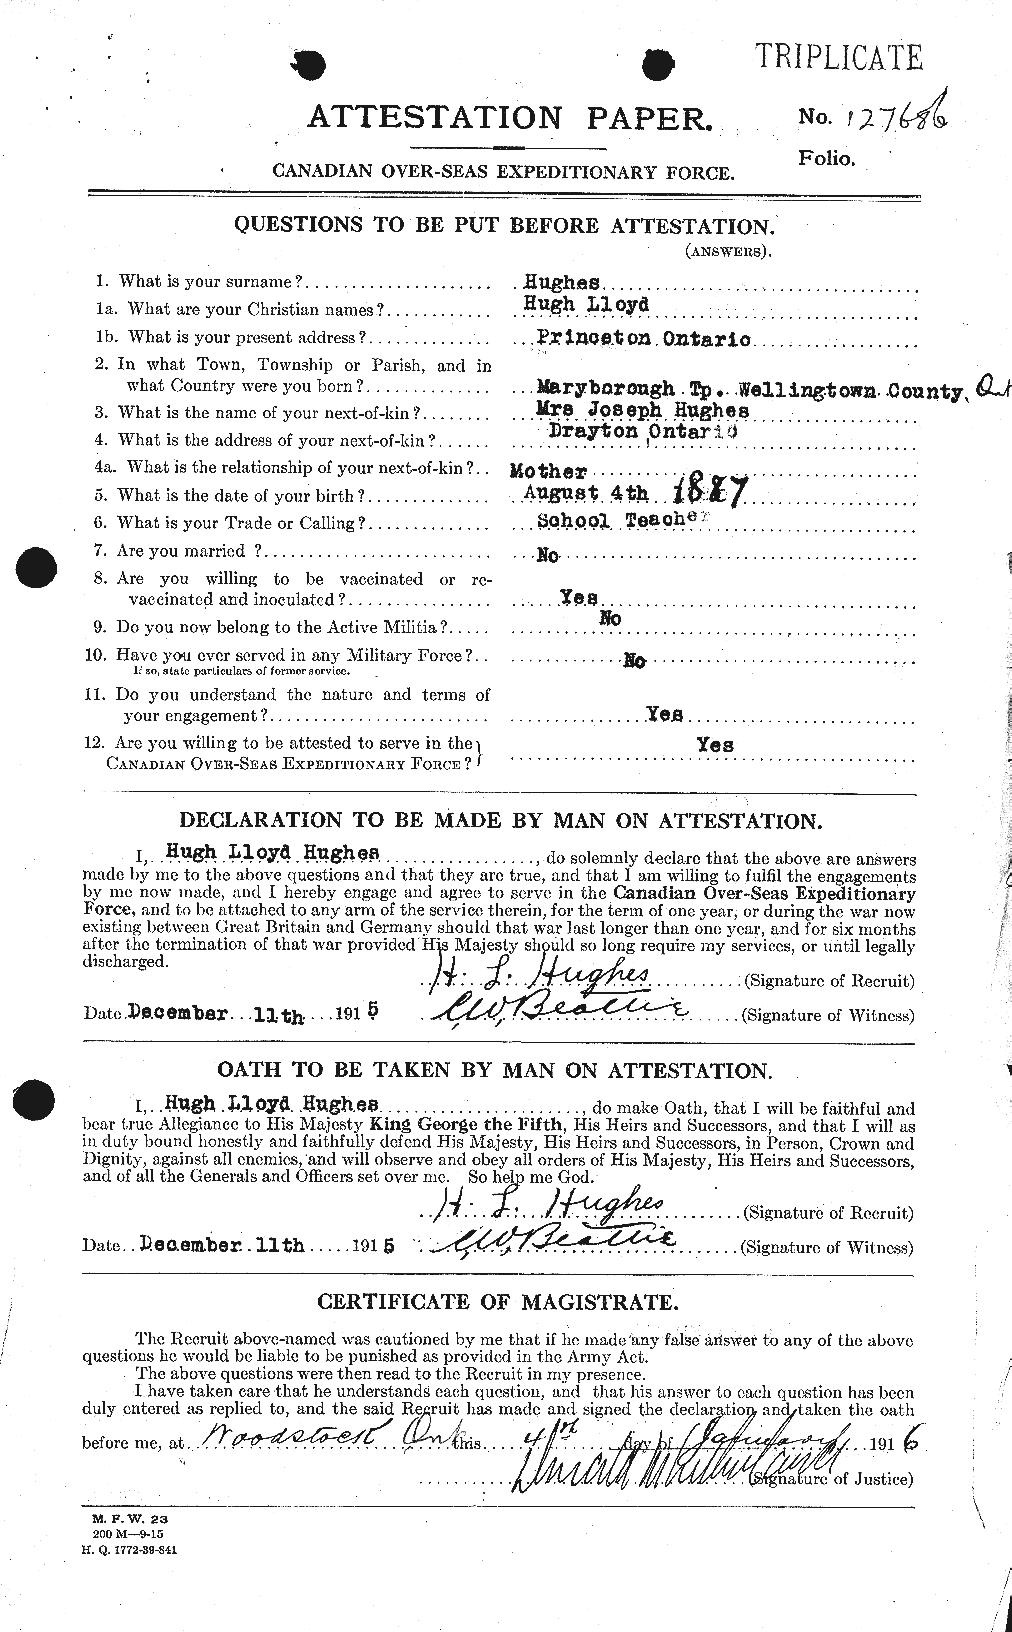 Personnel Records of the First World War - CEF 403924a